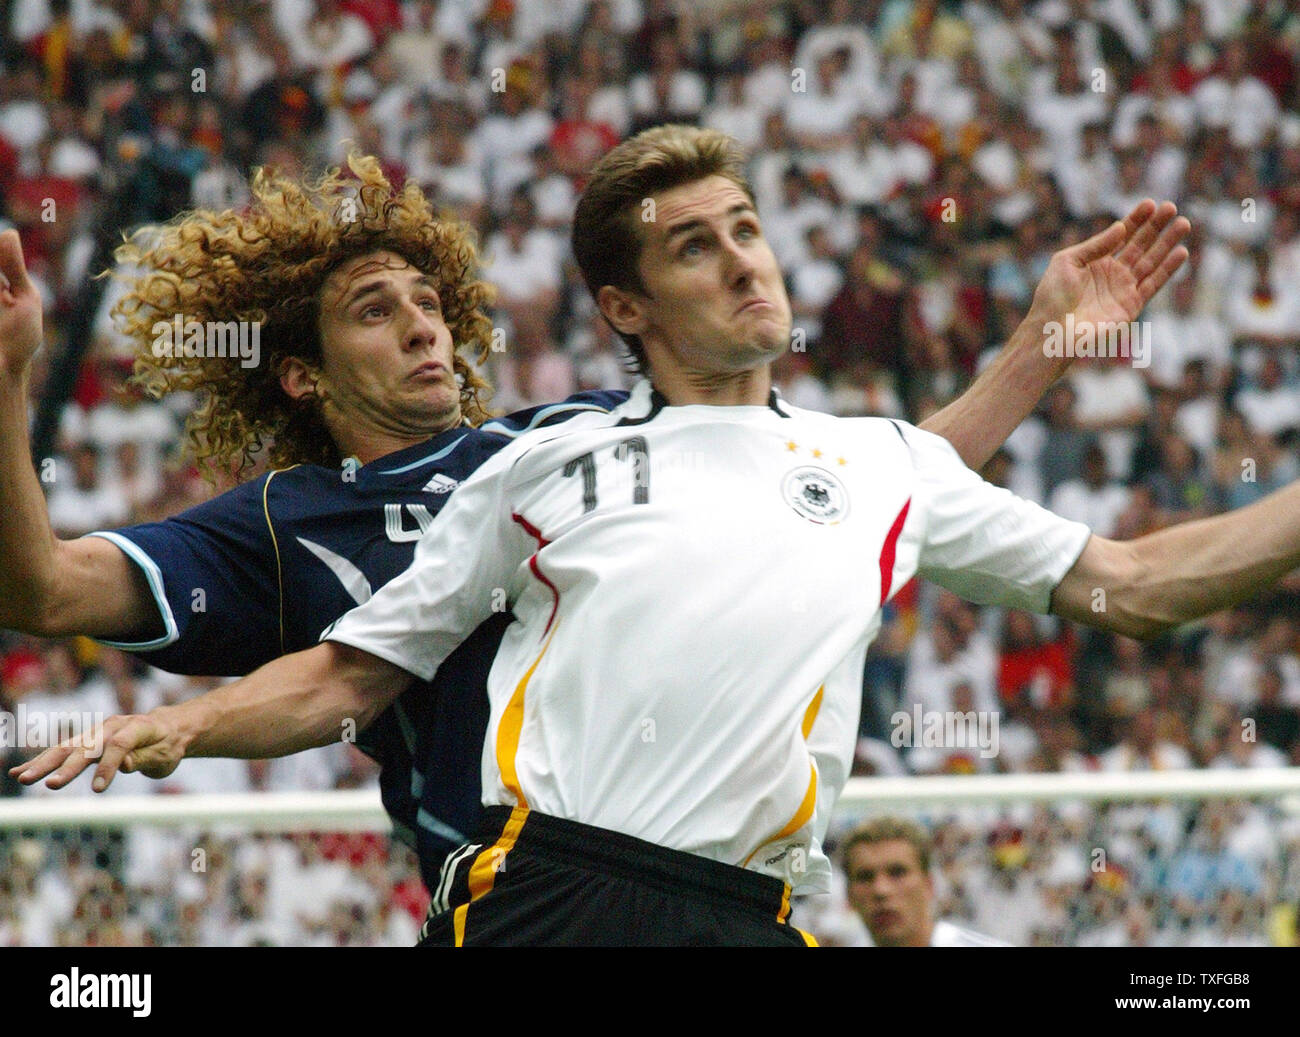 Miroslav Klose of Germany (11) and Argentina's Fabricio Coloccini (4) try and get the head on the ball during World Cup soccer at Olympiastadion on Friday, June 30, 2006. Germany defeated Argentina 4-2.   (UPI Photo/Arthur Thill) Stock Photo